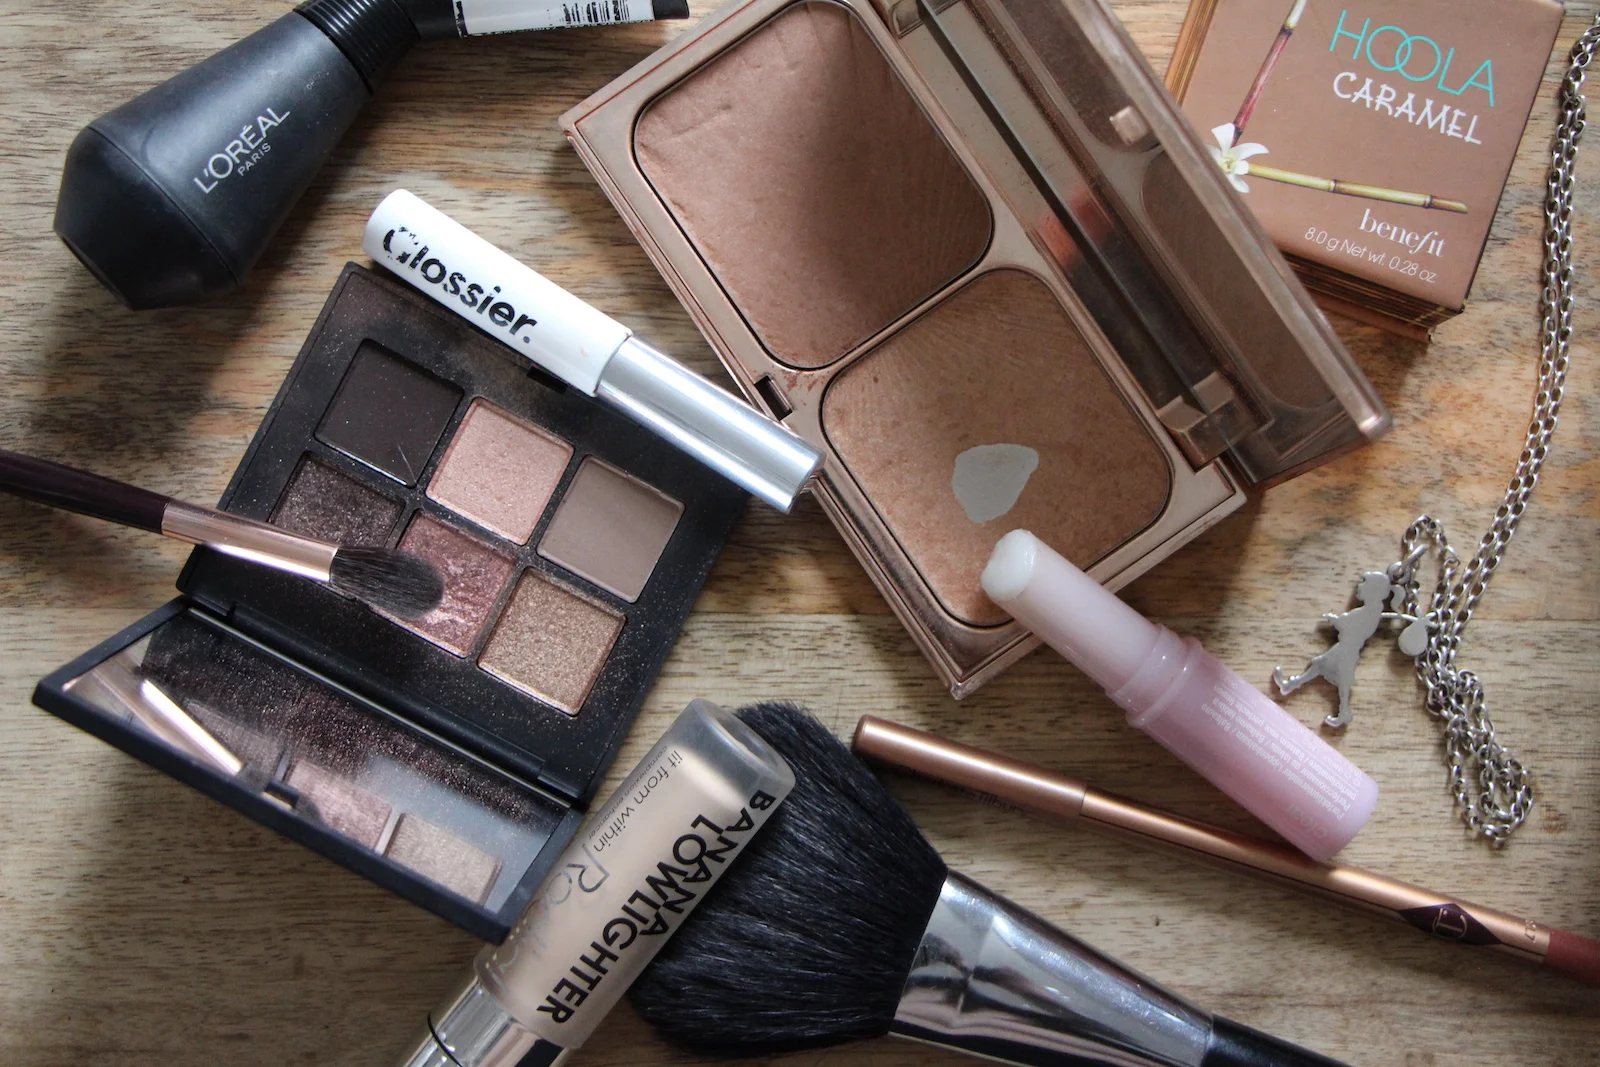 What’s In My Makeup Bag? The Time Capsule